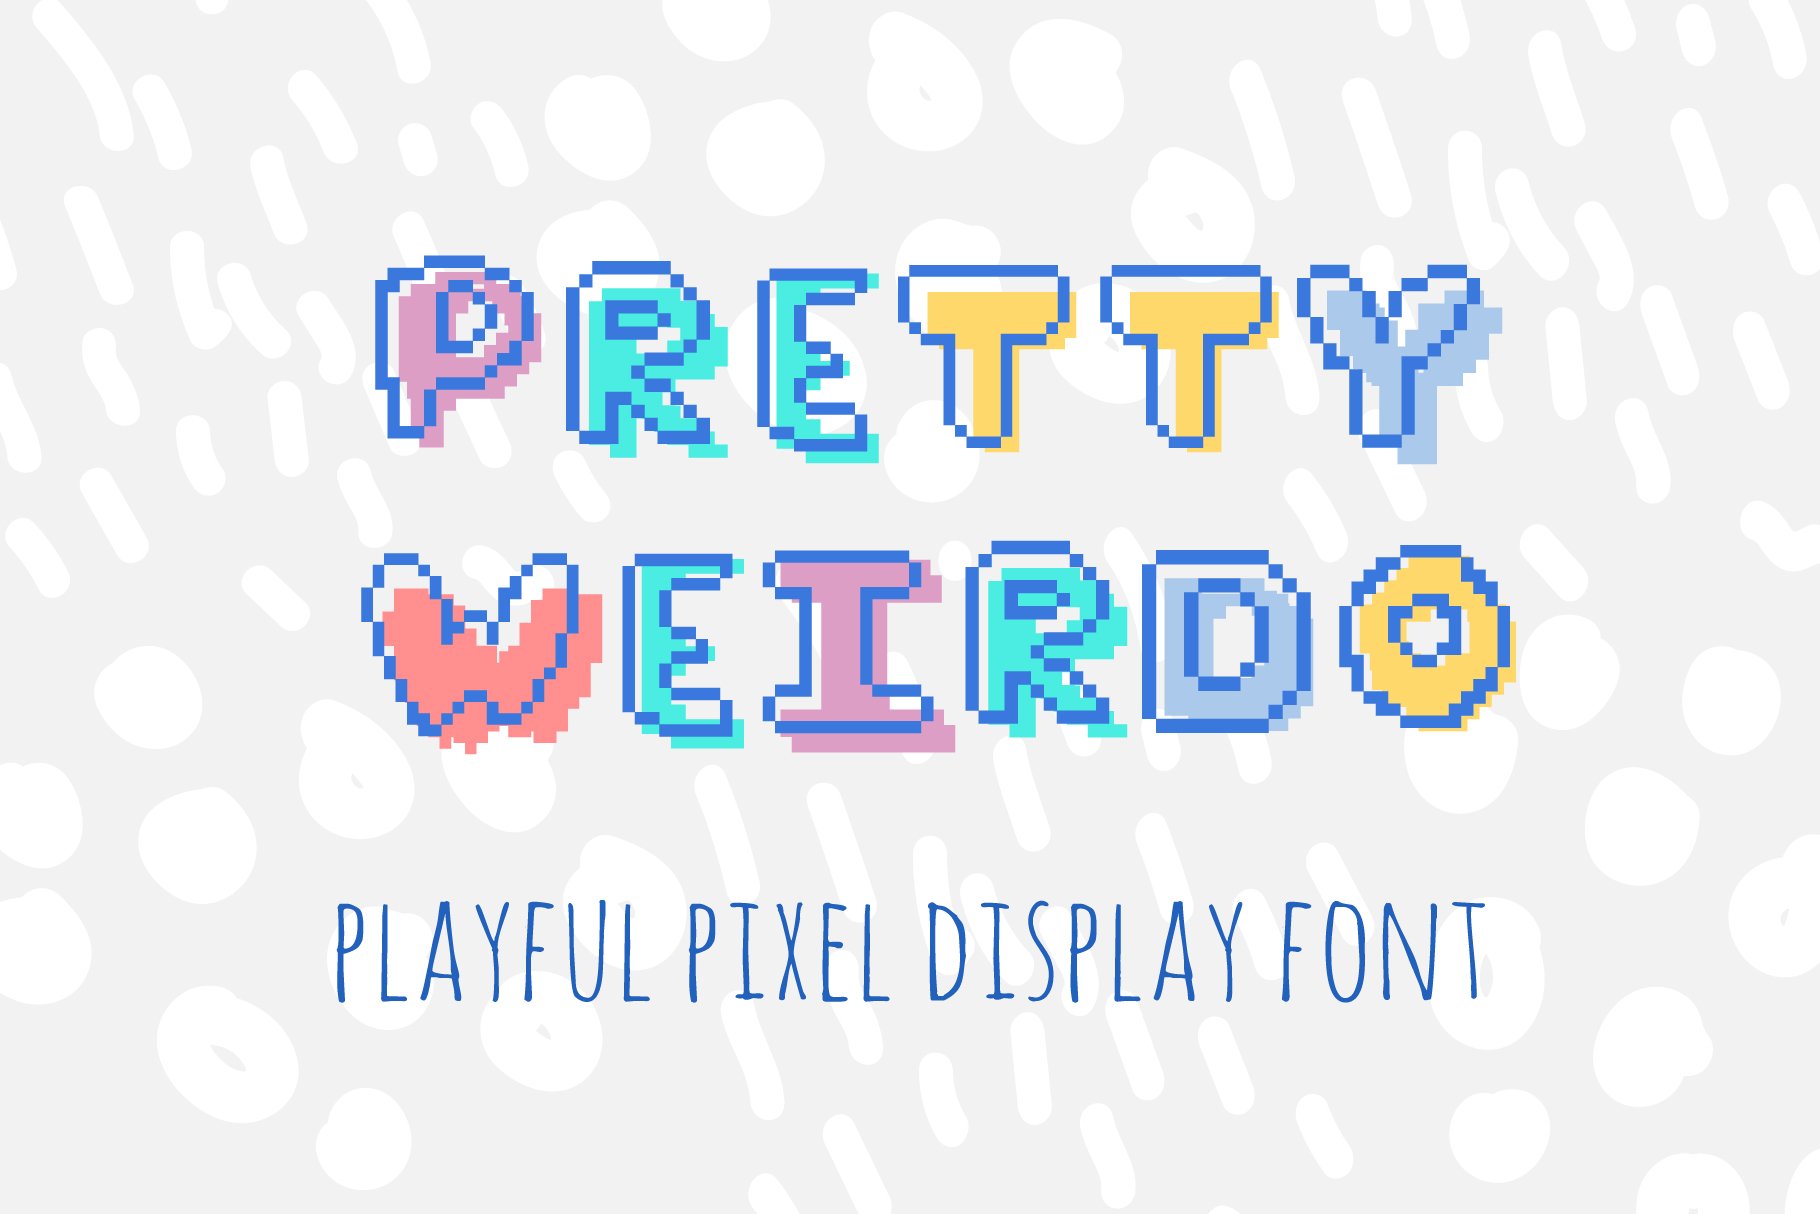 PRETTY WEIRDO pixel display font cover image.